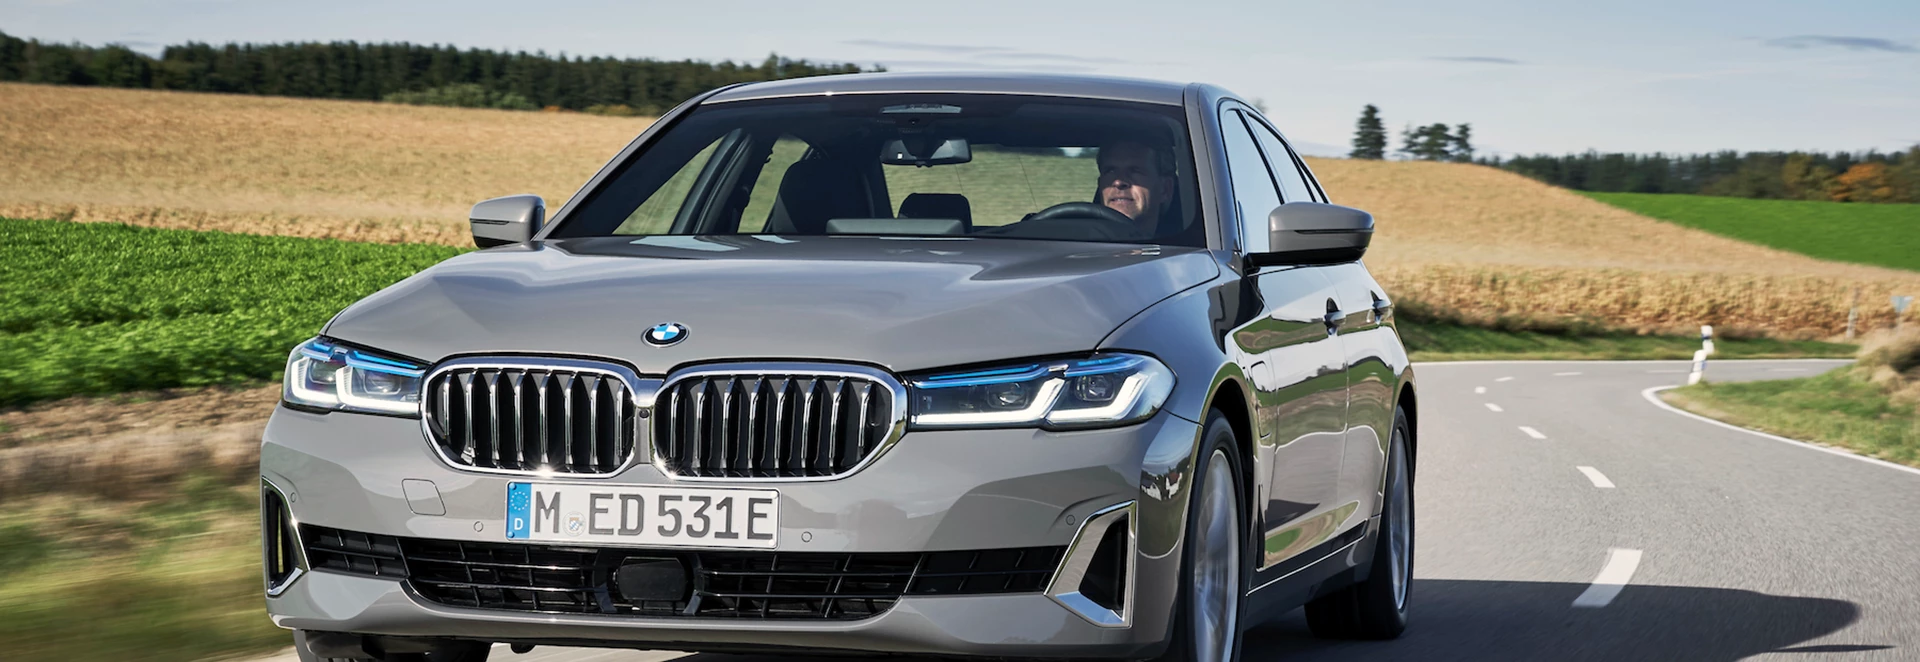 BMW expands plug-in hybrid line-up with new 320e and 520e models 